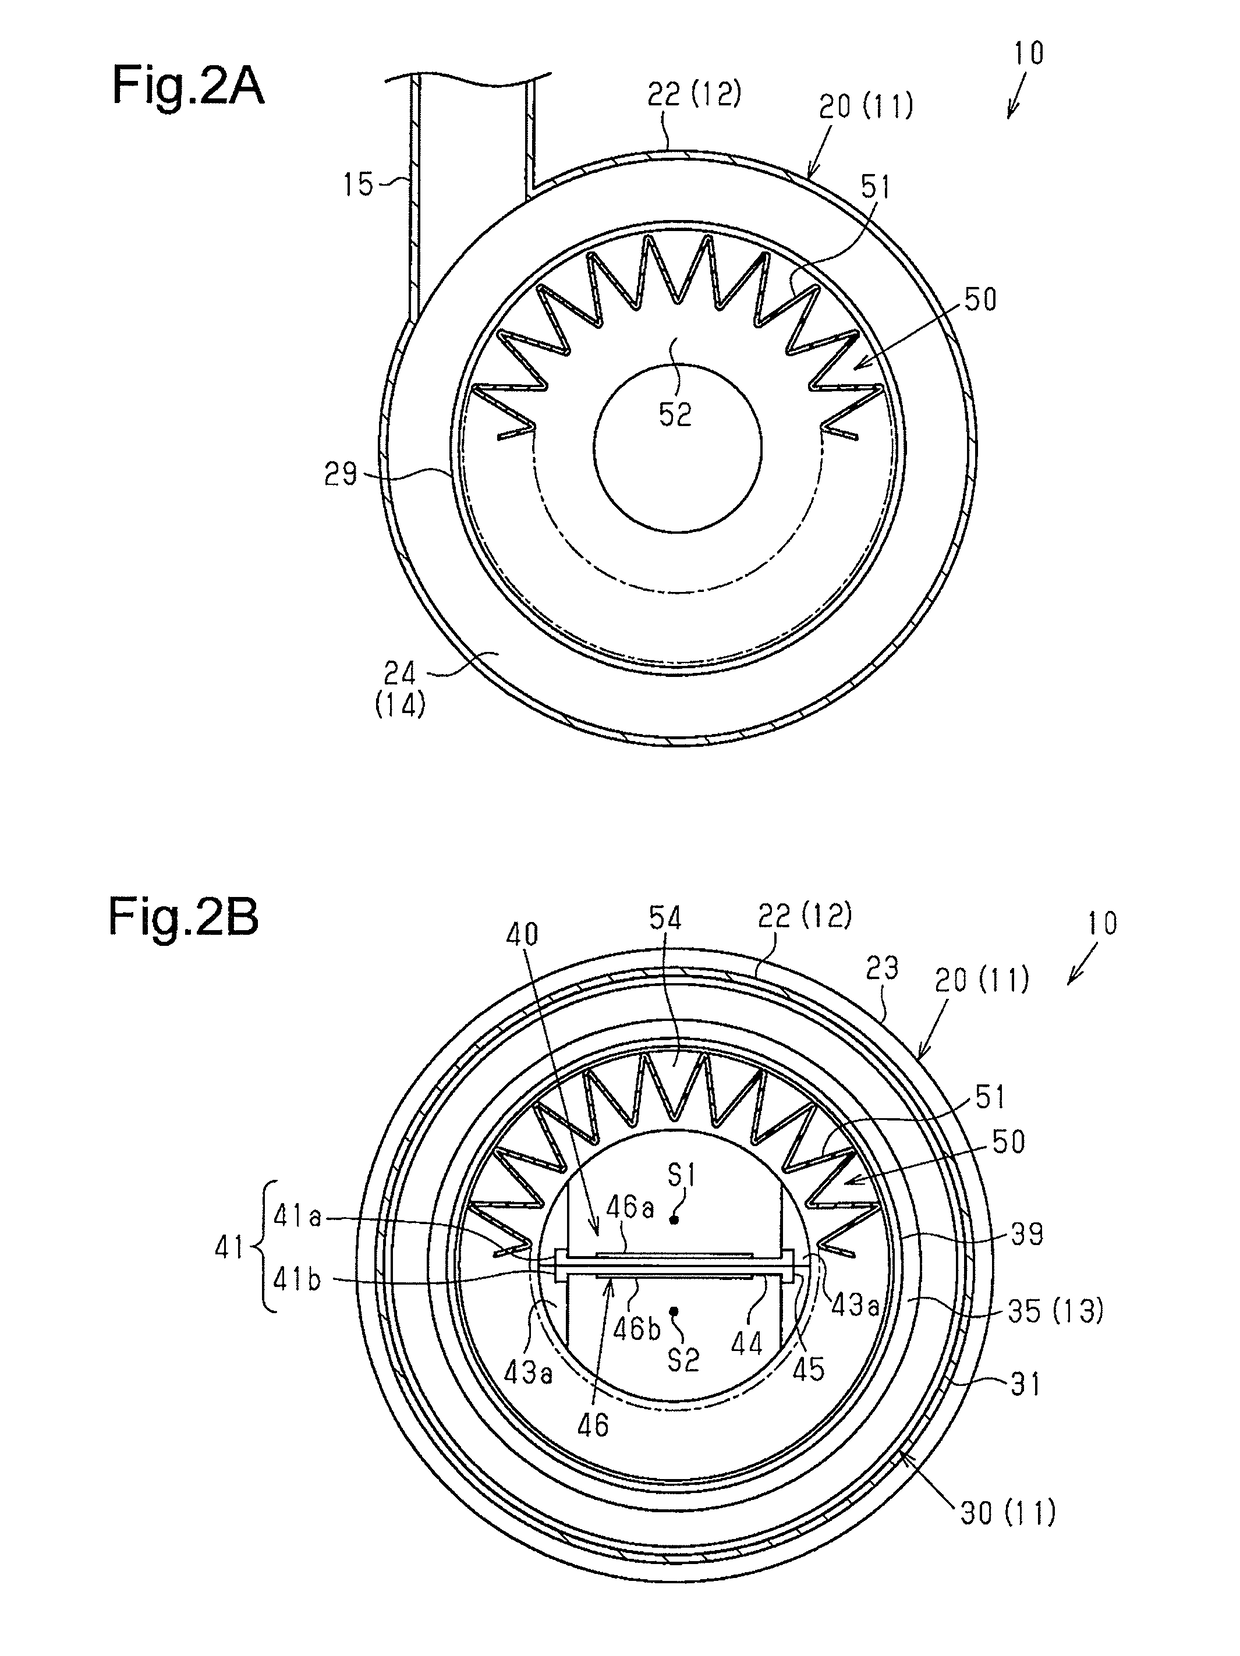 Tubular air cleaner for internal combustion engine